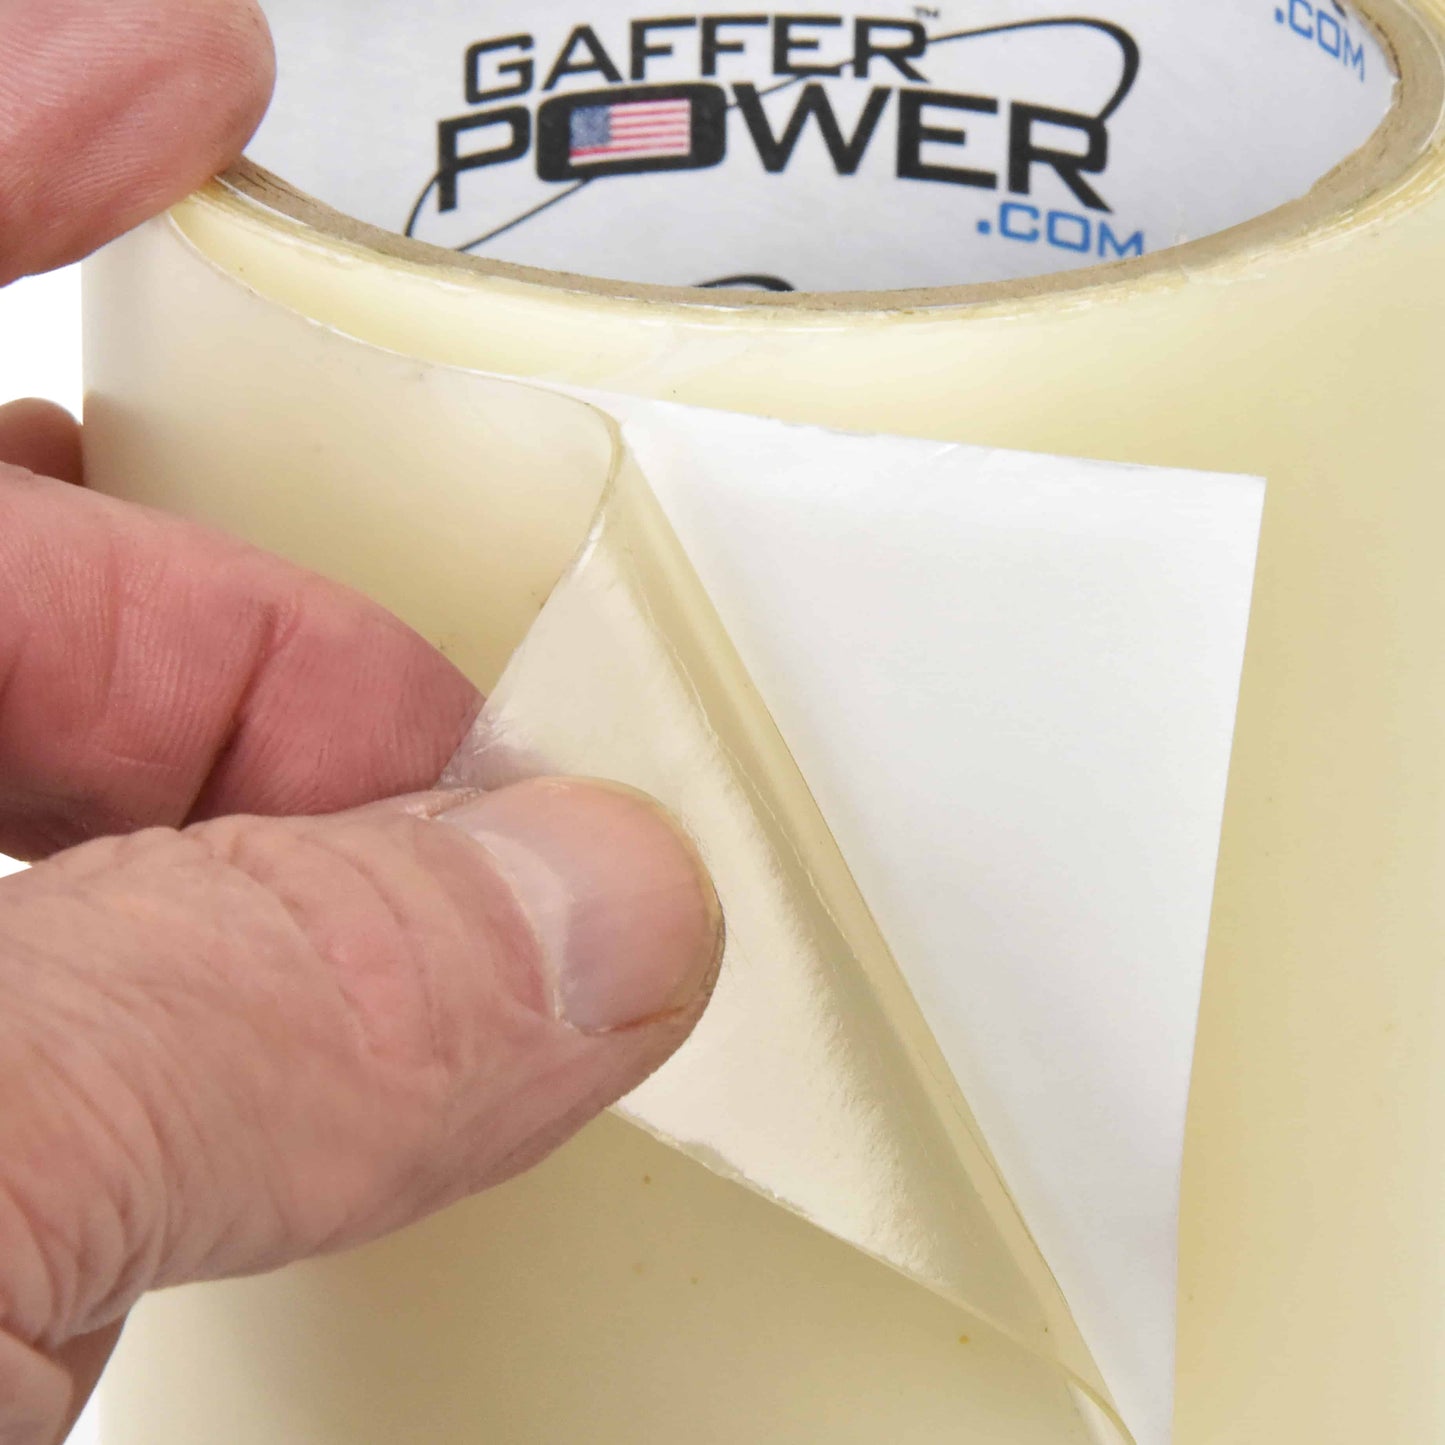 Repair Tape | Butyl Seal Tape | USA Made Quality | Waterproof Rubberized | 8 in x 5 FT | by Gaffer Power